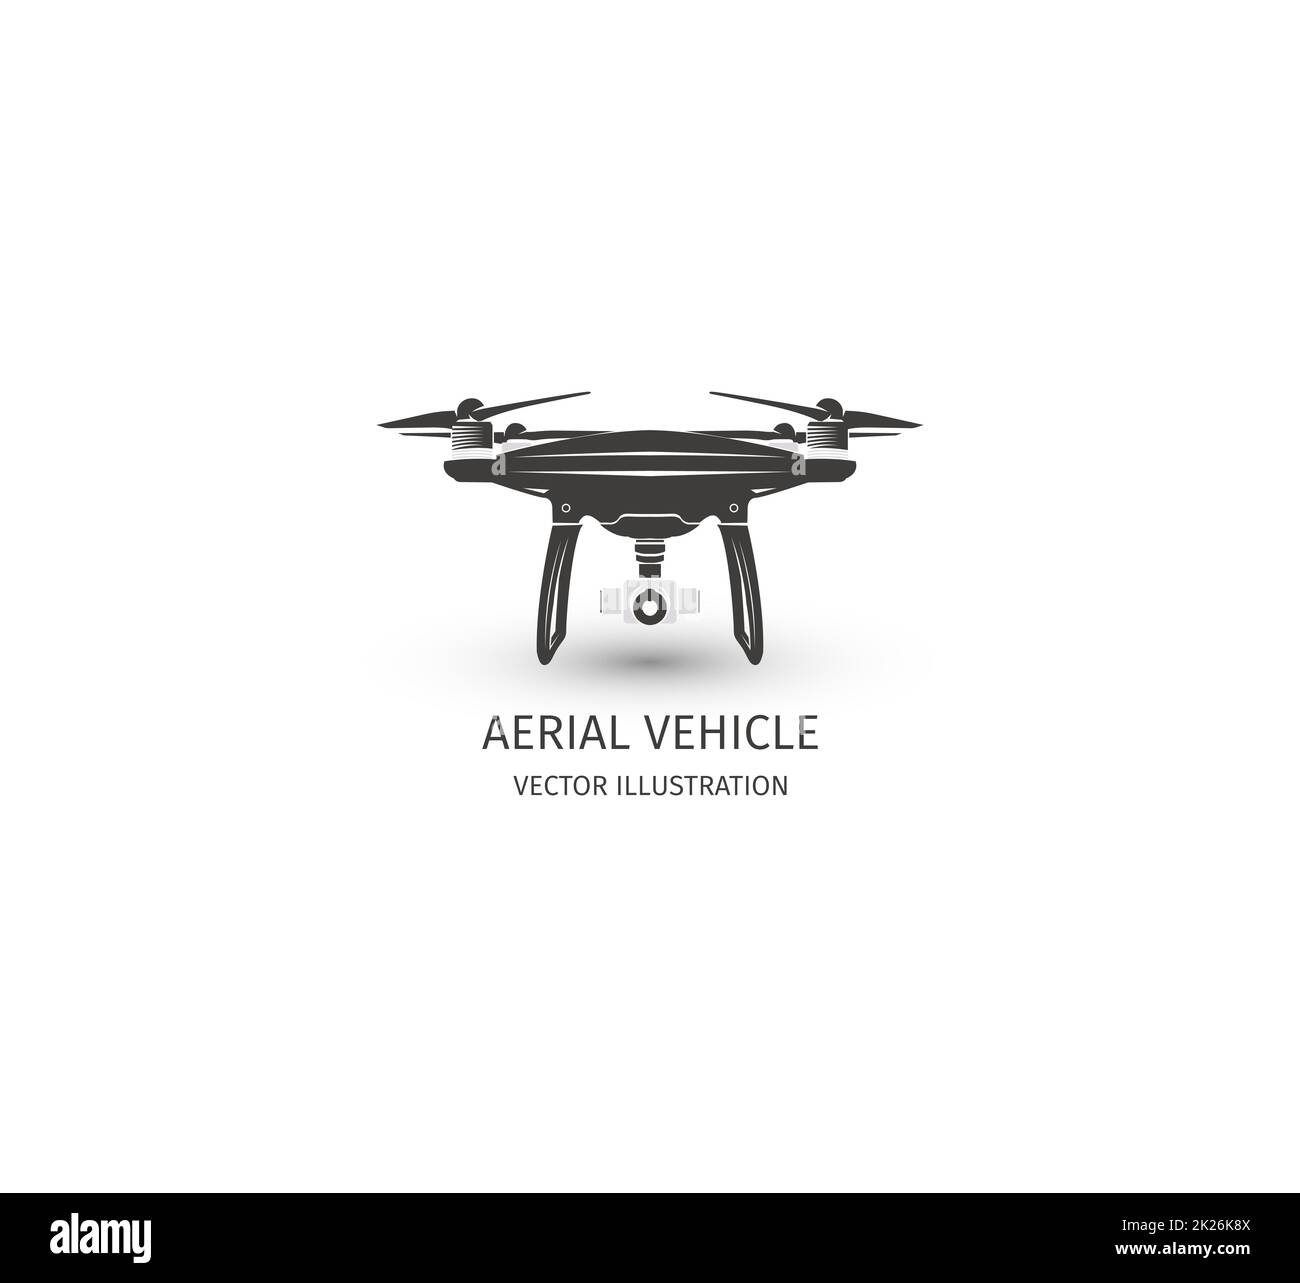 Isolated rc drone logo on white. UAV technology logotype. Unmanned aerial vehicle icon. Remote control device sign. Surveillance vision multirotor. Vector quadcopter illustration. Stock Photo